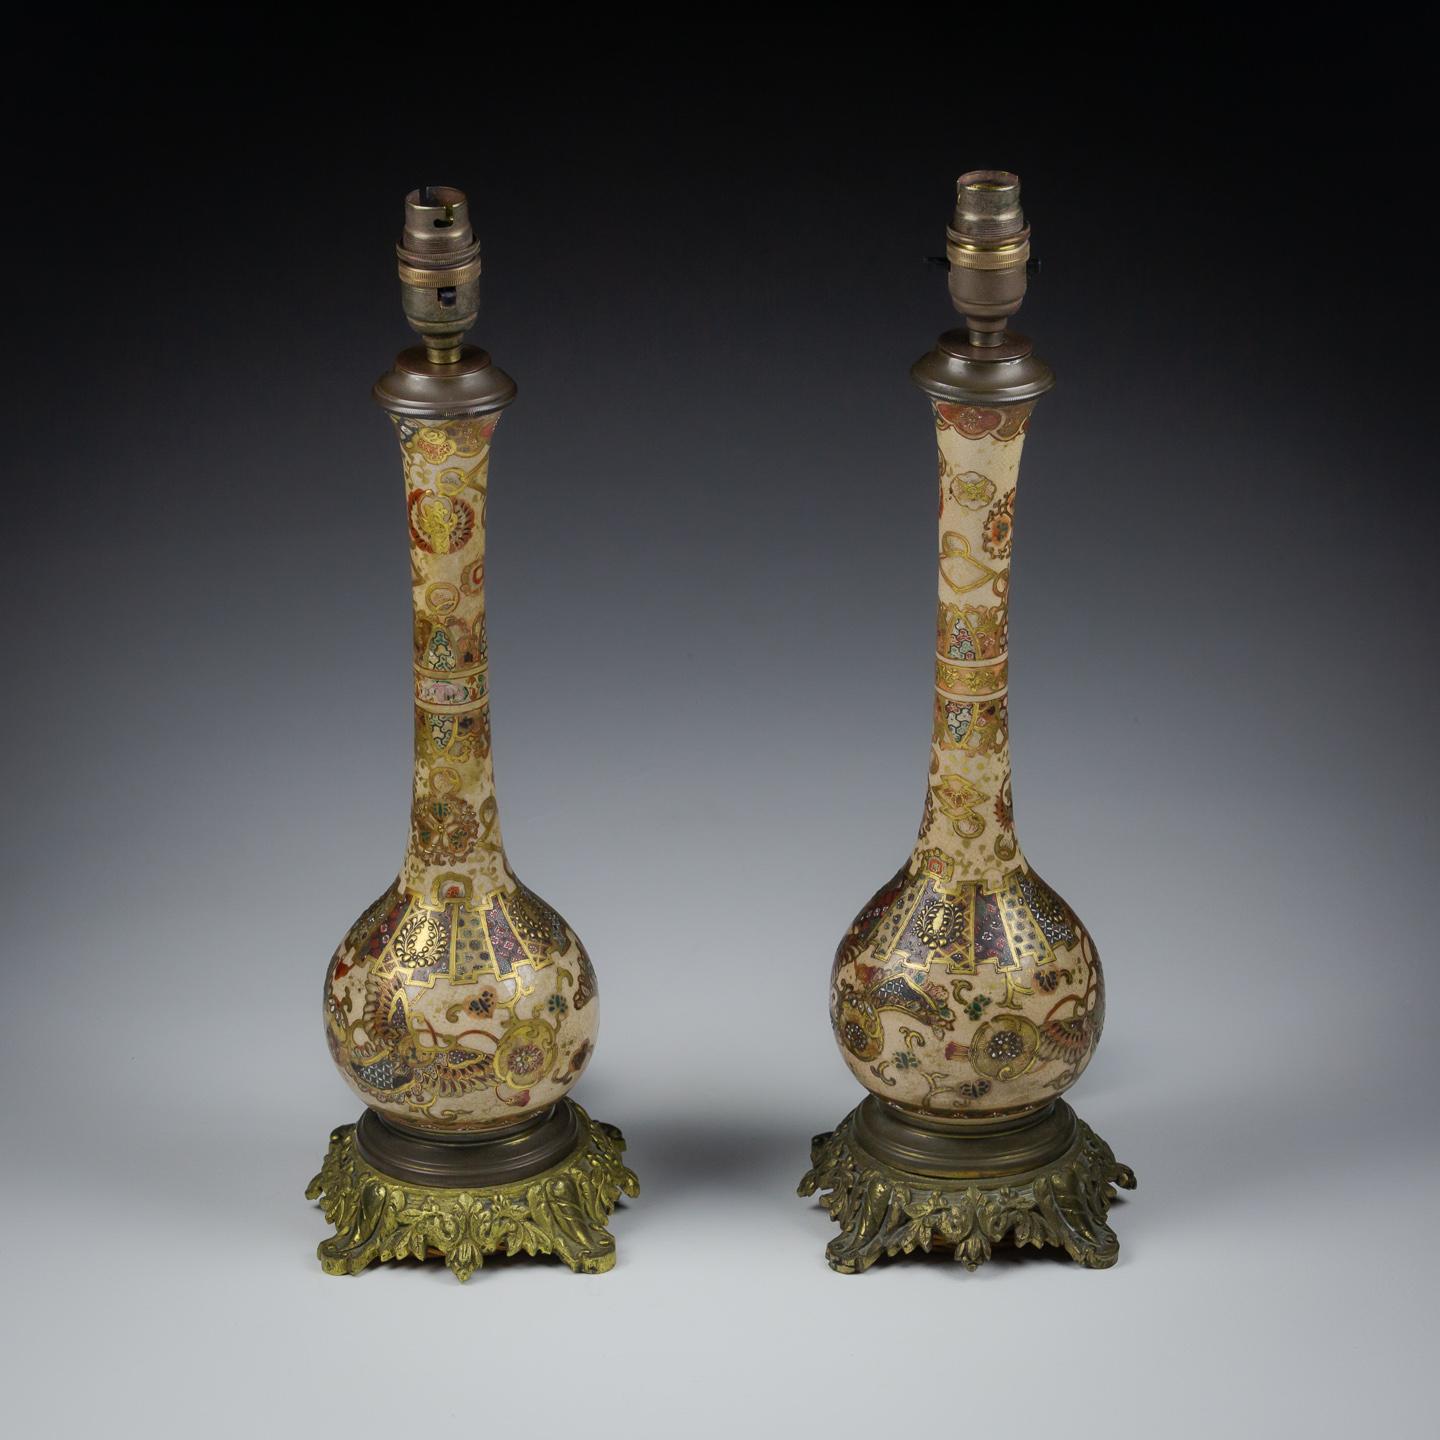 Pair of Porcelain Satsuma Bottle Vase Lamps. impressive condition, most likely converted as lamps in mid 20th Century using excellent quality bronze mounts.

Japan, Meiji Period, Circa 1880.

Rewired with antique style cord flex and PAT tested to UK